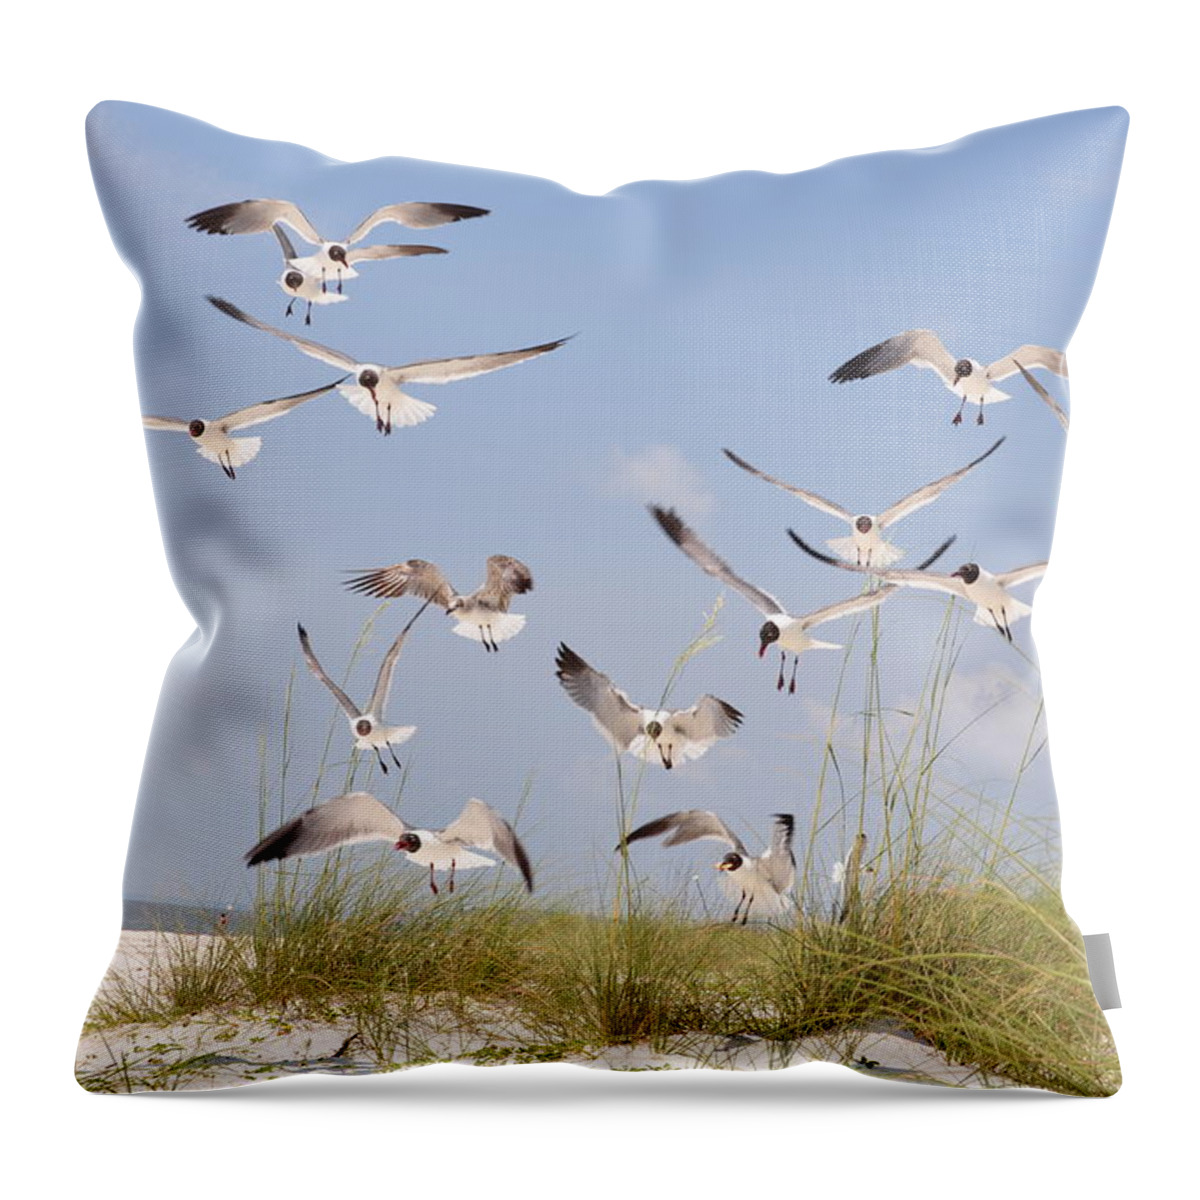 Seascapes Throw Pillow featuring the photograph Out Of The Blue by Jan Amiss Photography